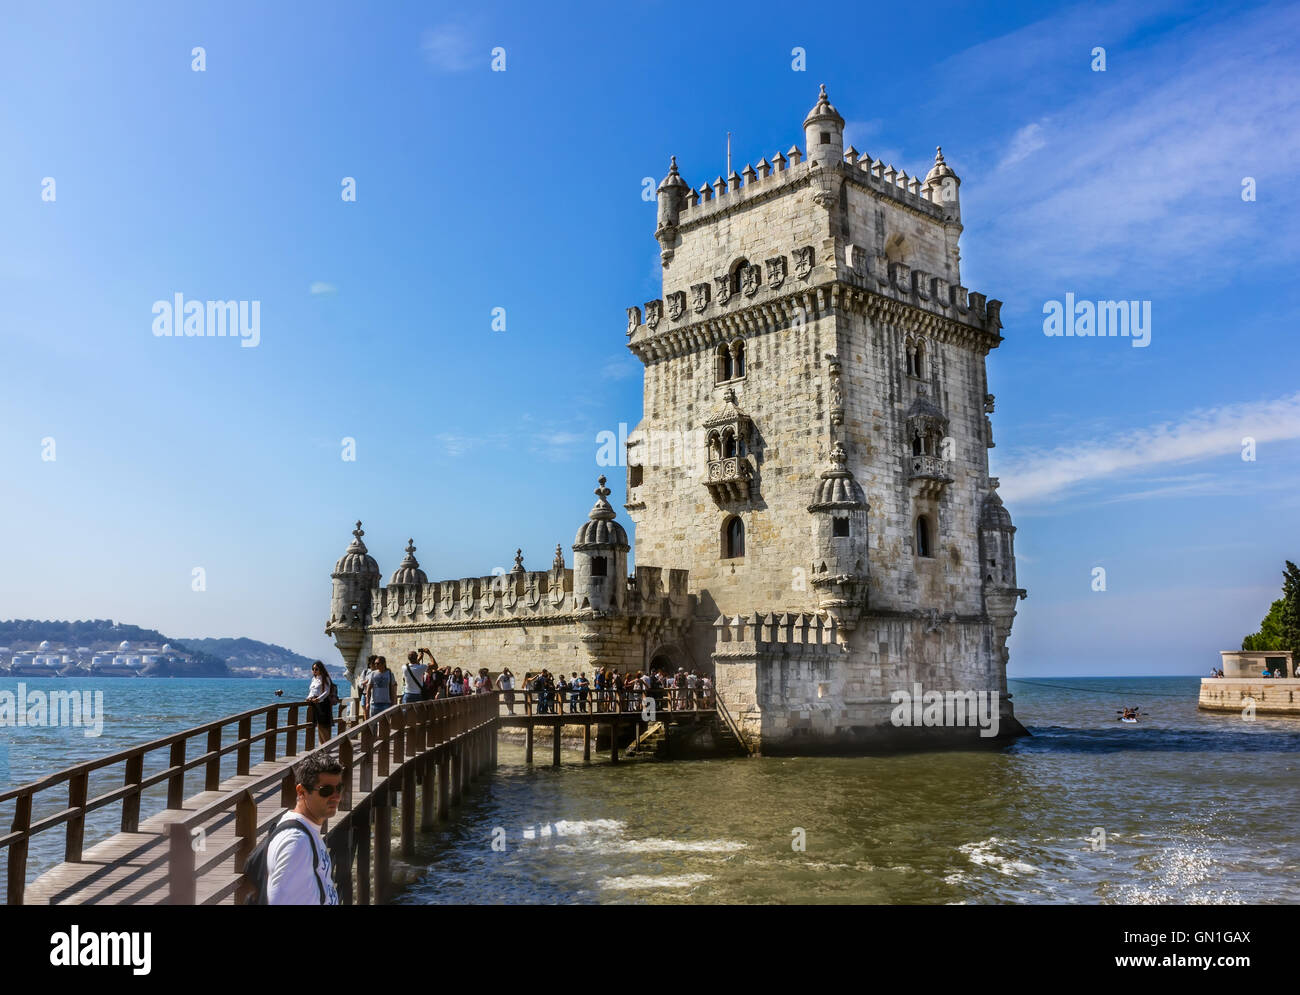 Belem Tower is a fortified tower located in the civil parish of Santa Maria de Belem in Lisbon, Portugal Stock Photo